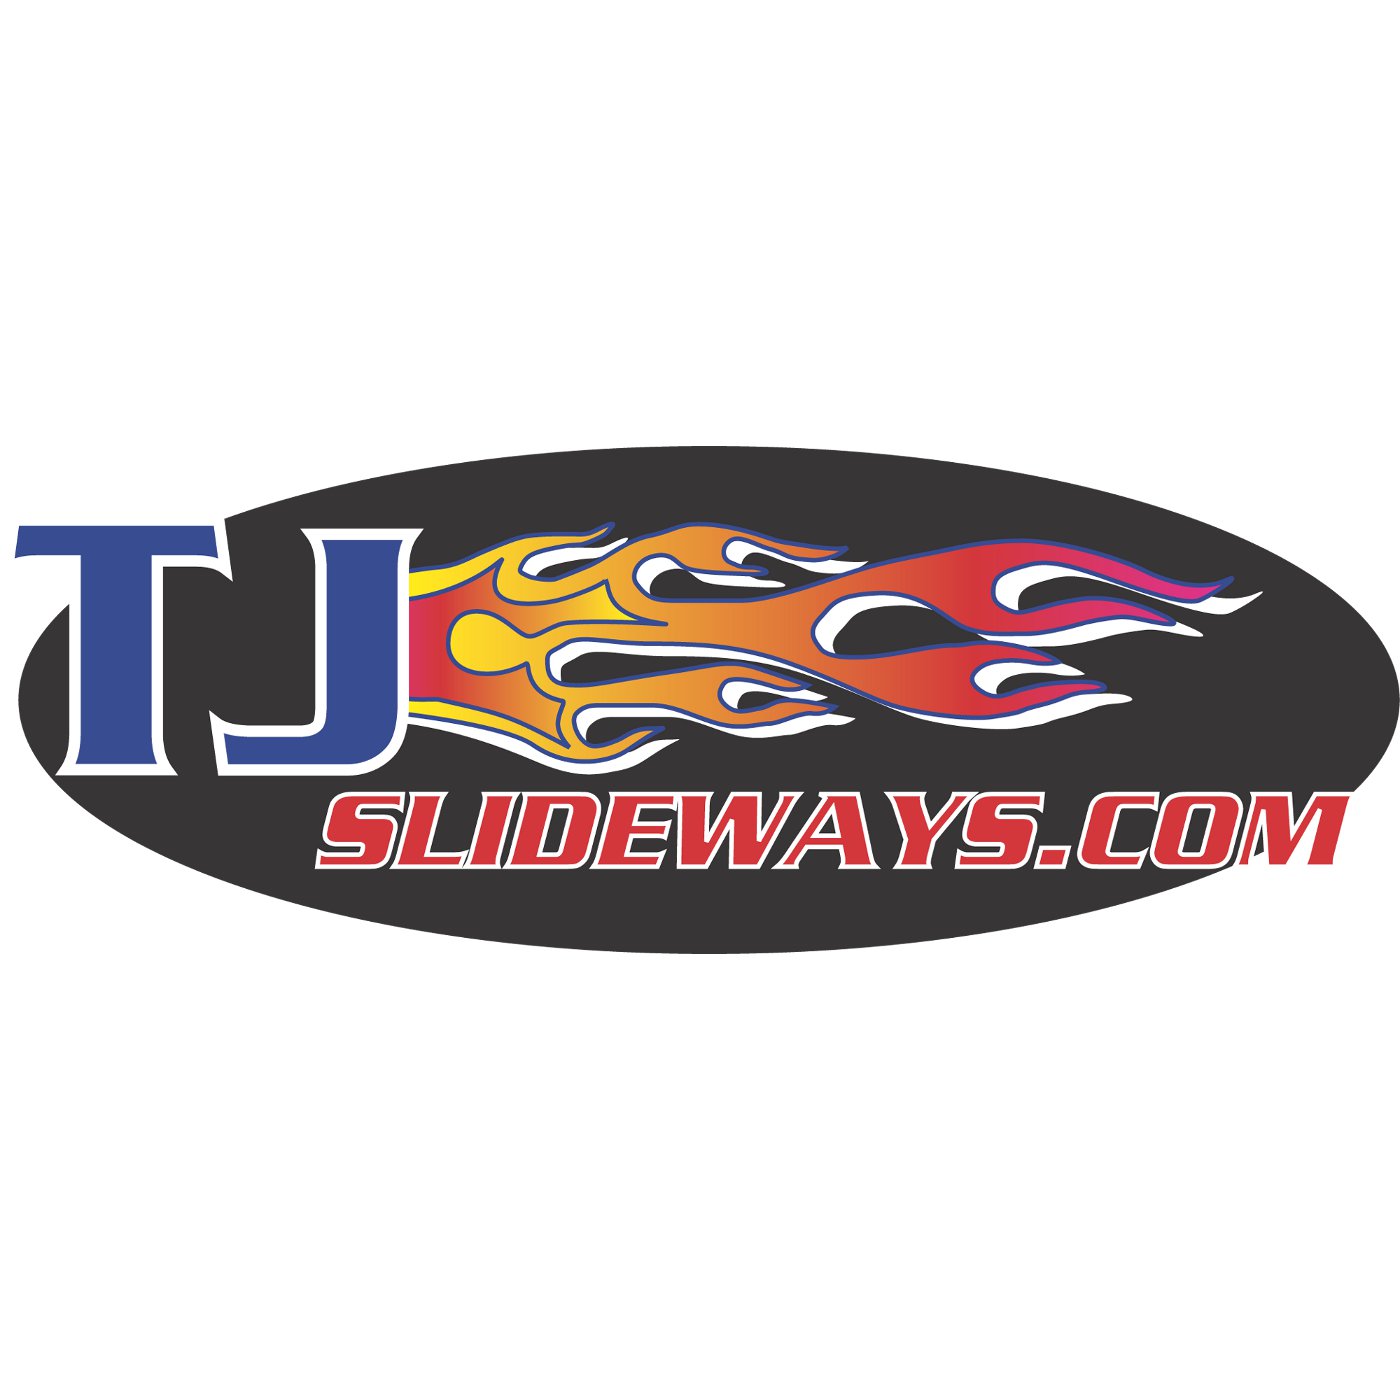 Episode 101: TJ and KO joined by David Gravel, Chase Ridenour, and Jacob Wilson